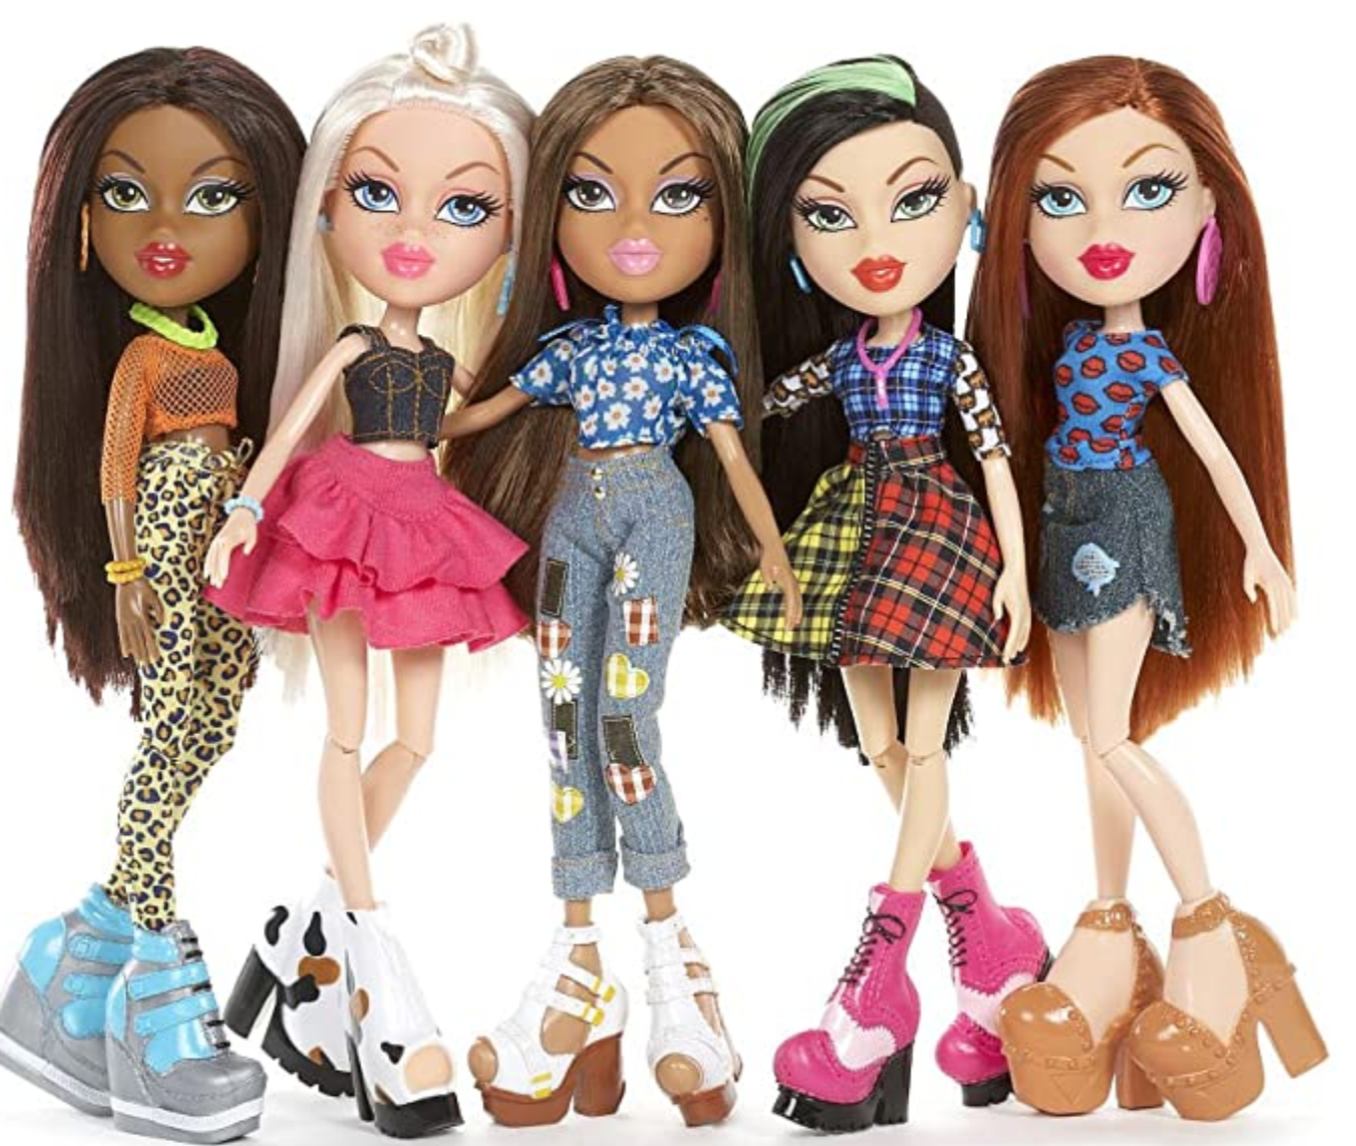 The Triumphs and Drawbacks in How Bratz Dolls Paved a New Path for ...